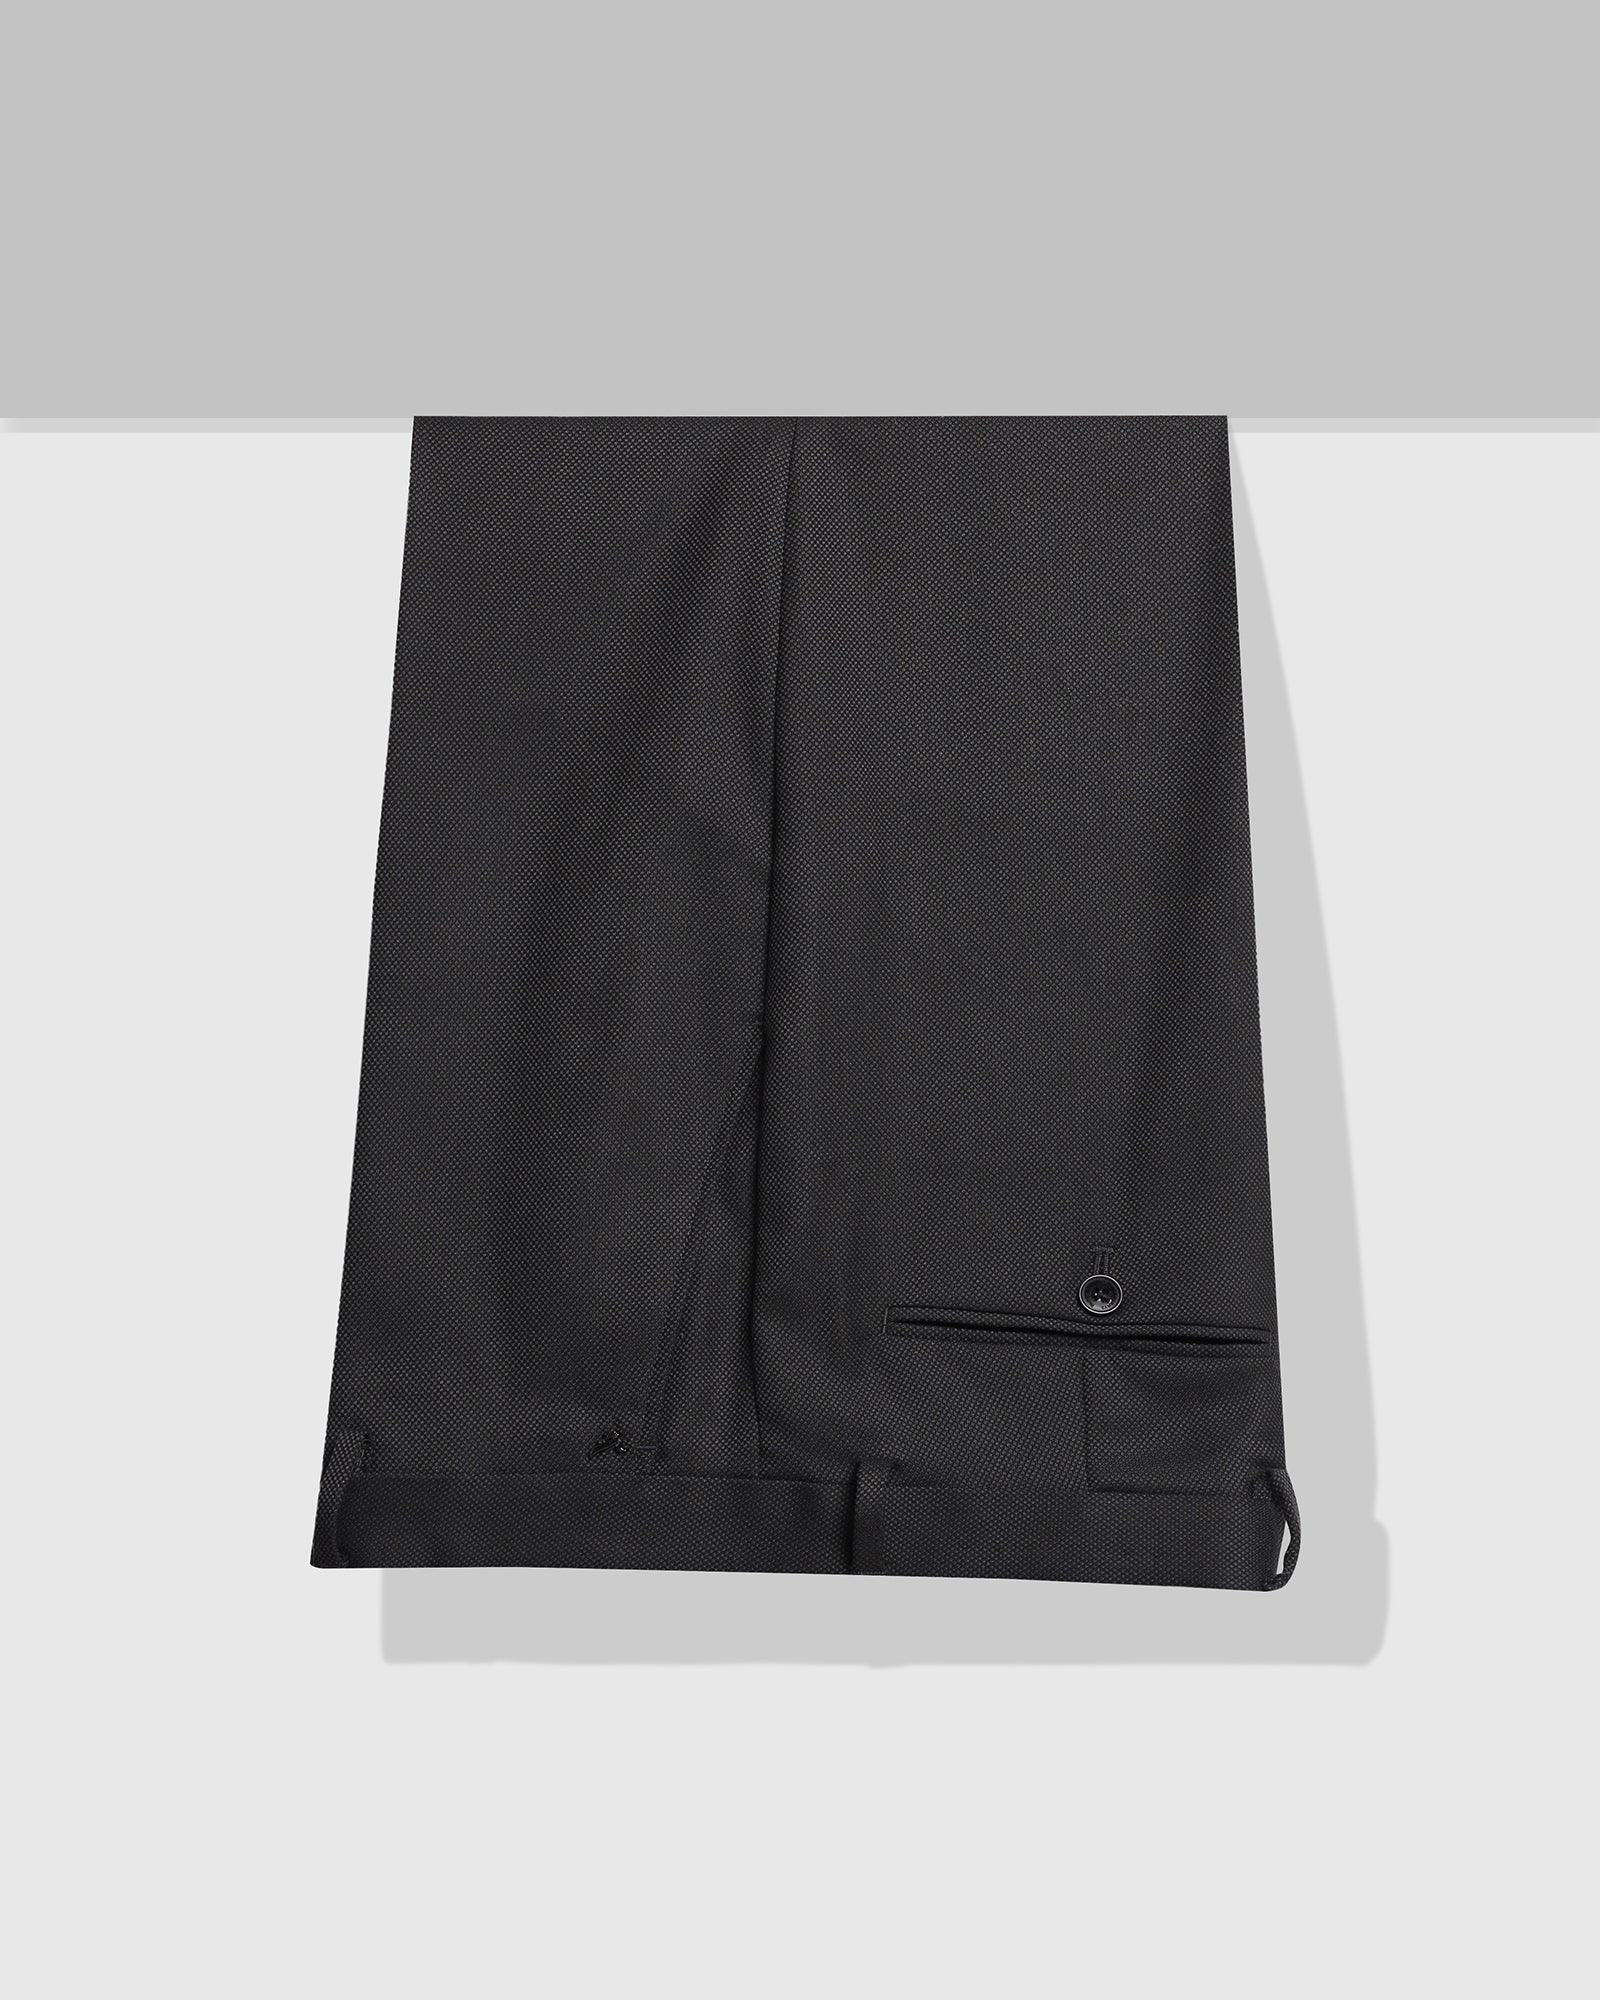 Straight B-90 Formal Charcoal Textured Trouser - Welta